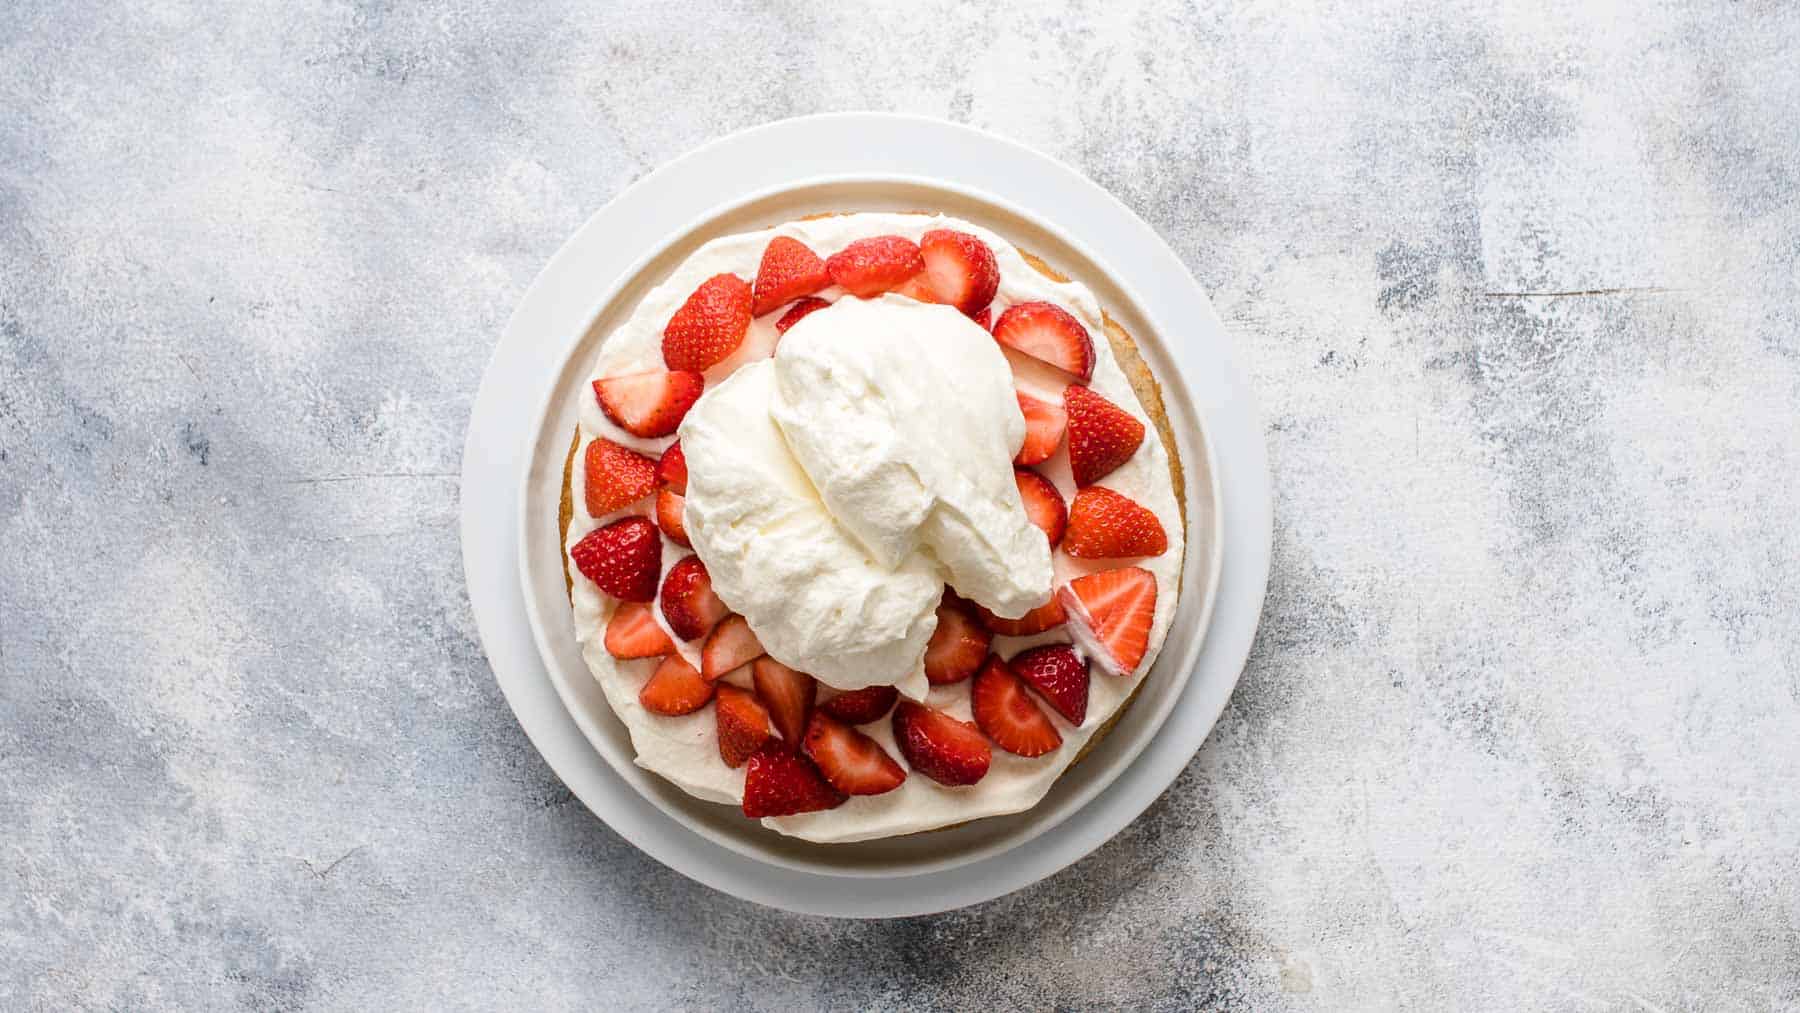 cake layer topped with whipped cream and fresh strawberries on a cake turner